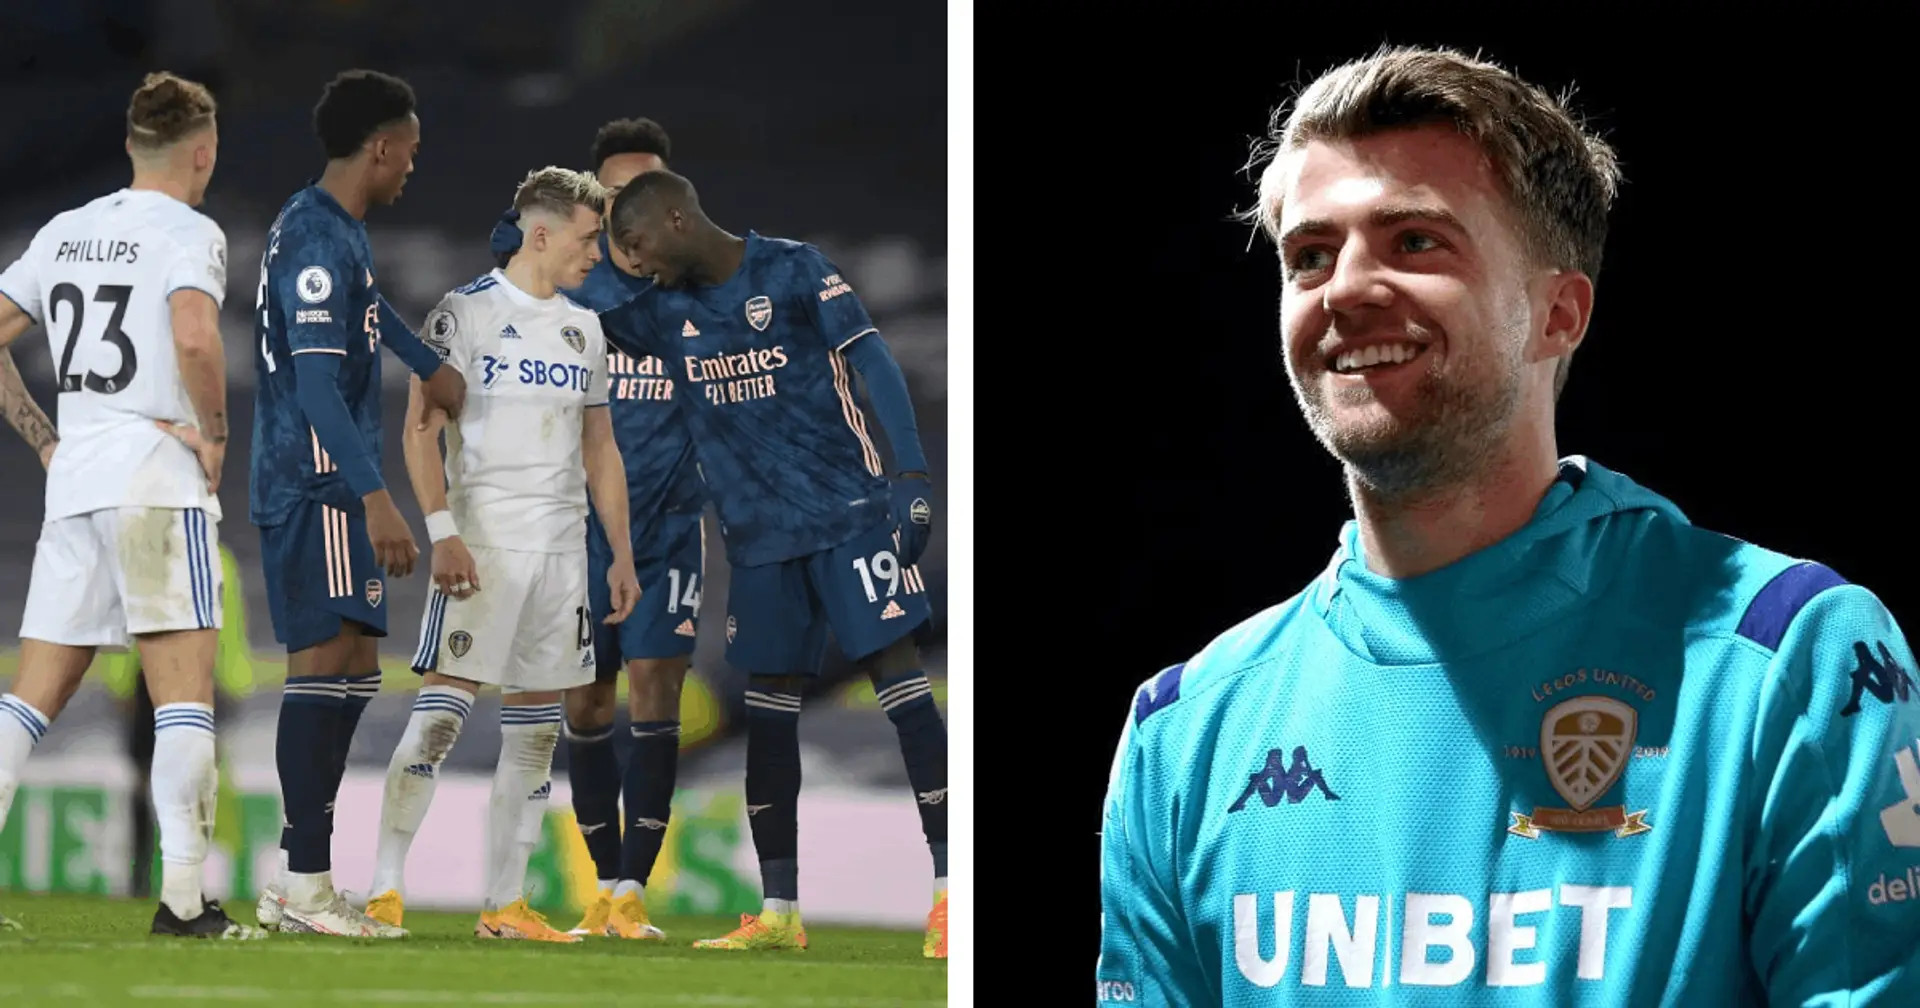 'I can't wait to play against my mate Pepe again': Leeds' Alioski who got Nico sent off in previous game